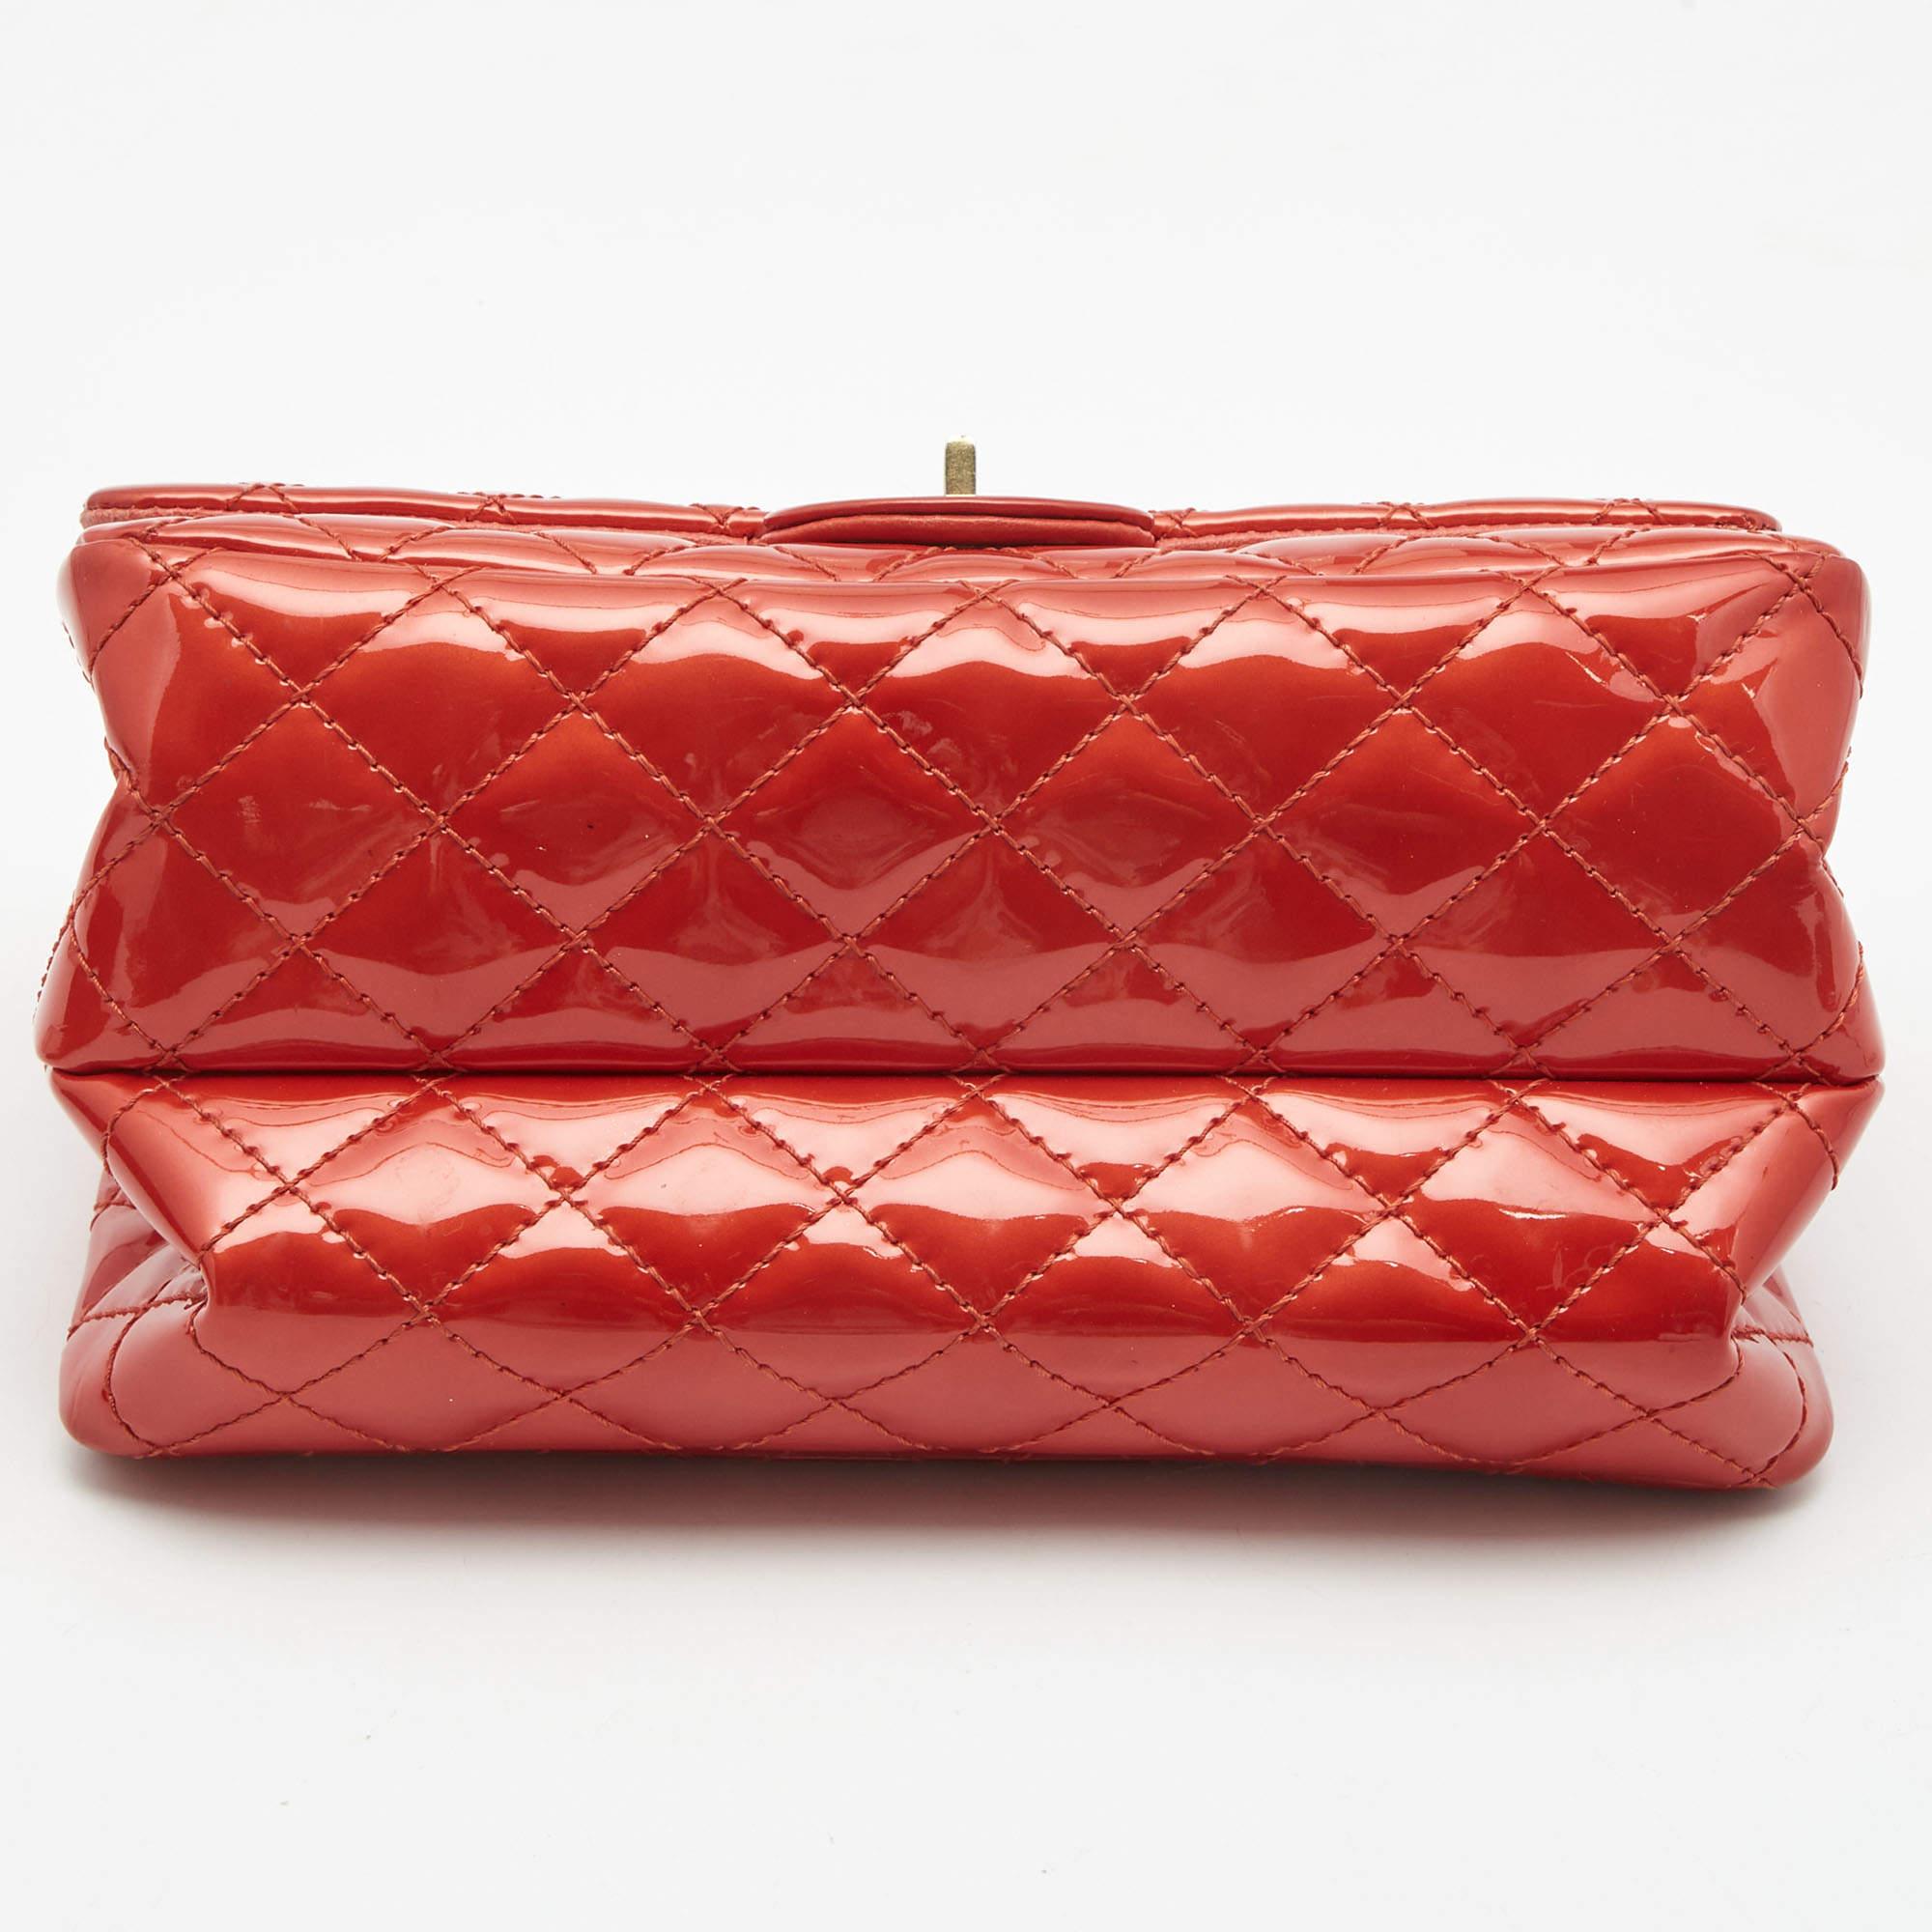 Women's Chanel Red Patent Leather Reissue Double Compartment Flap Bag